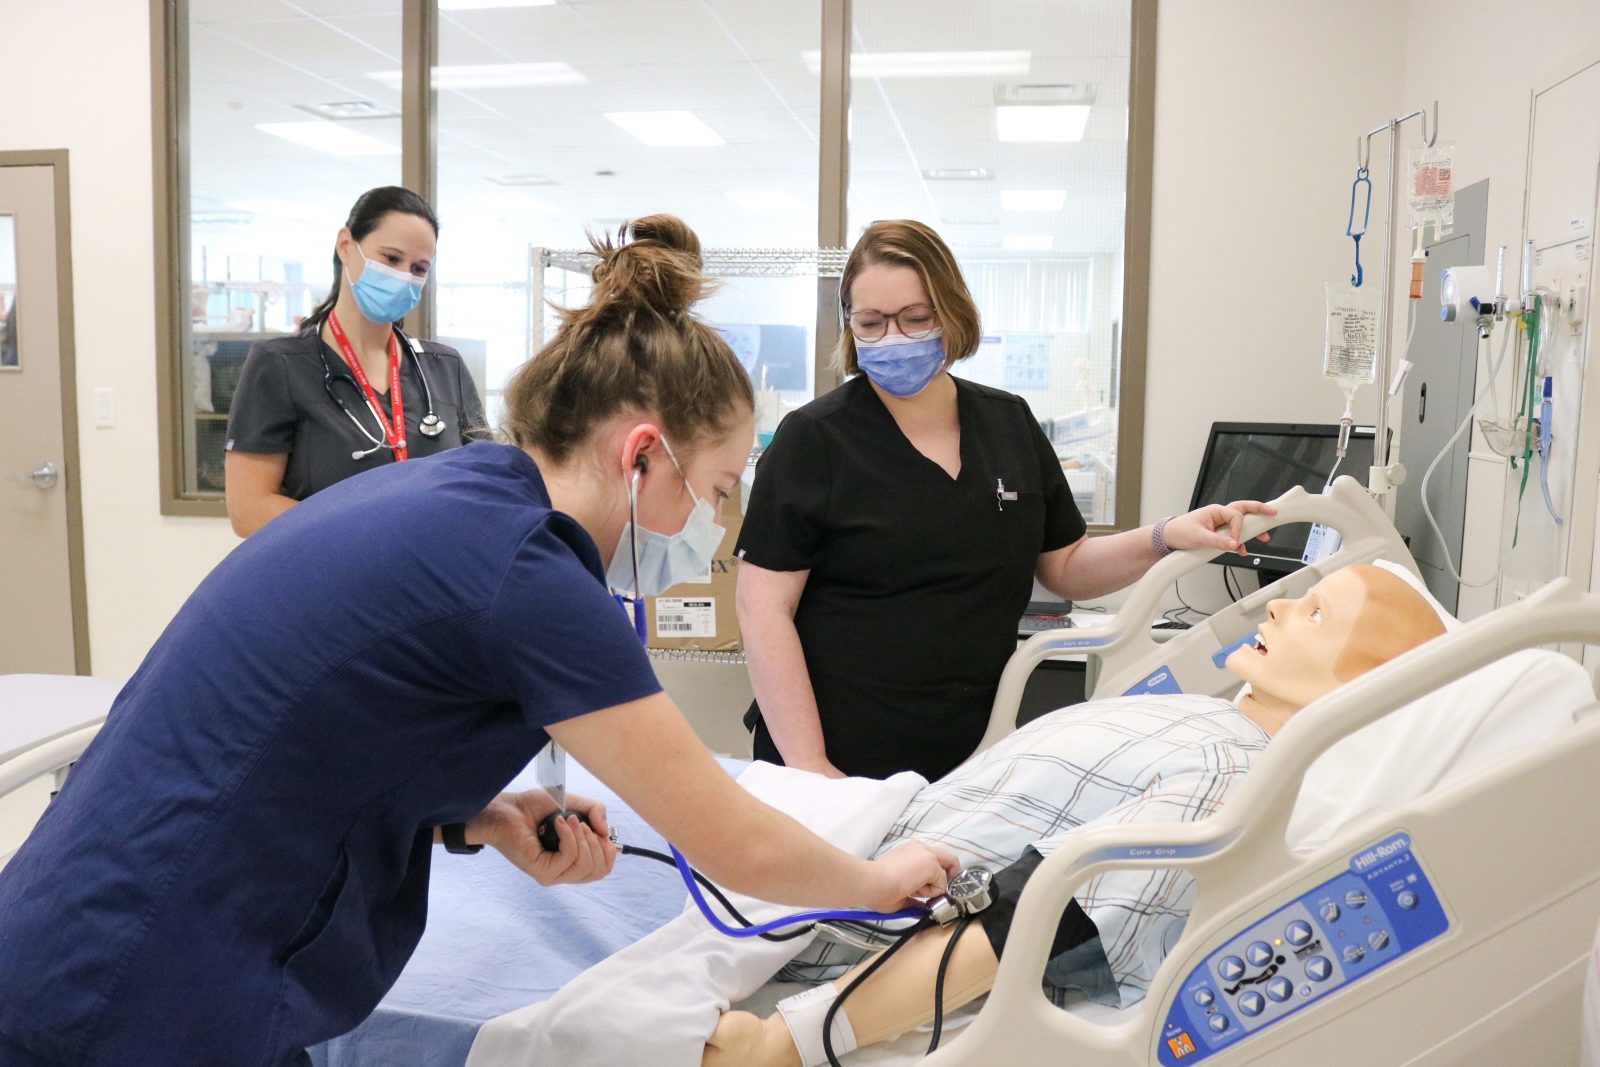 A female Nursing student checks the blood pressure of a simulator that looks like a male patient as two supervisors look on